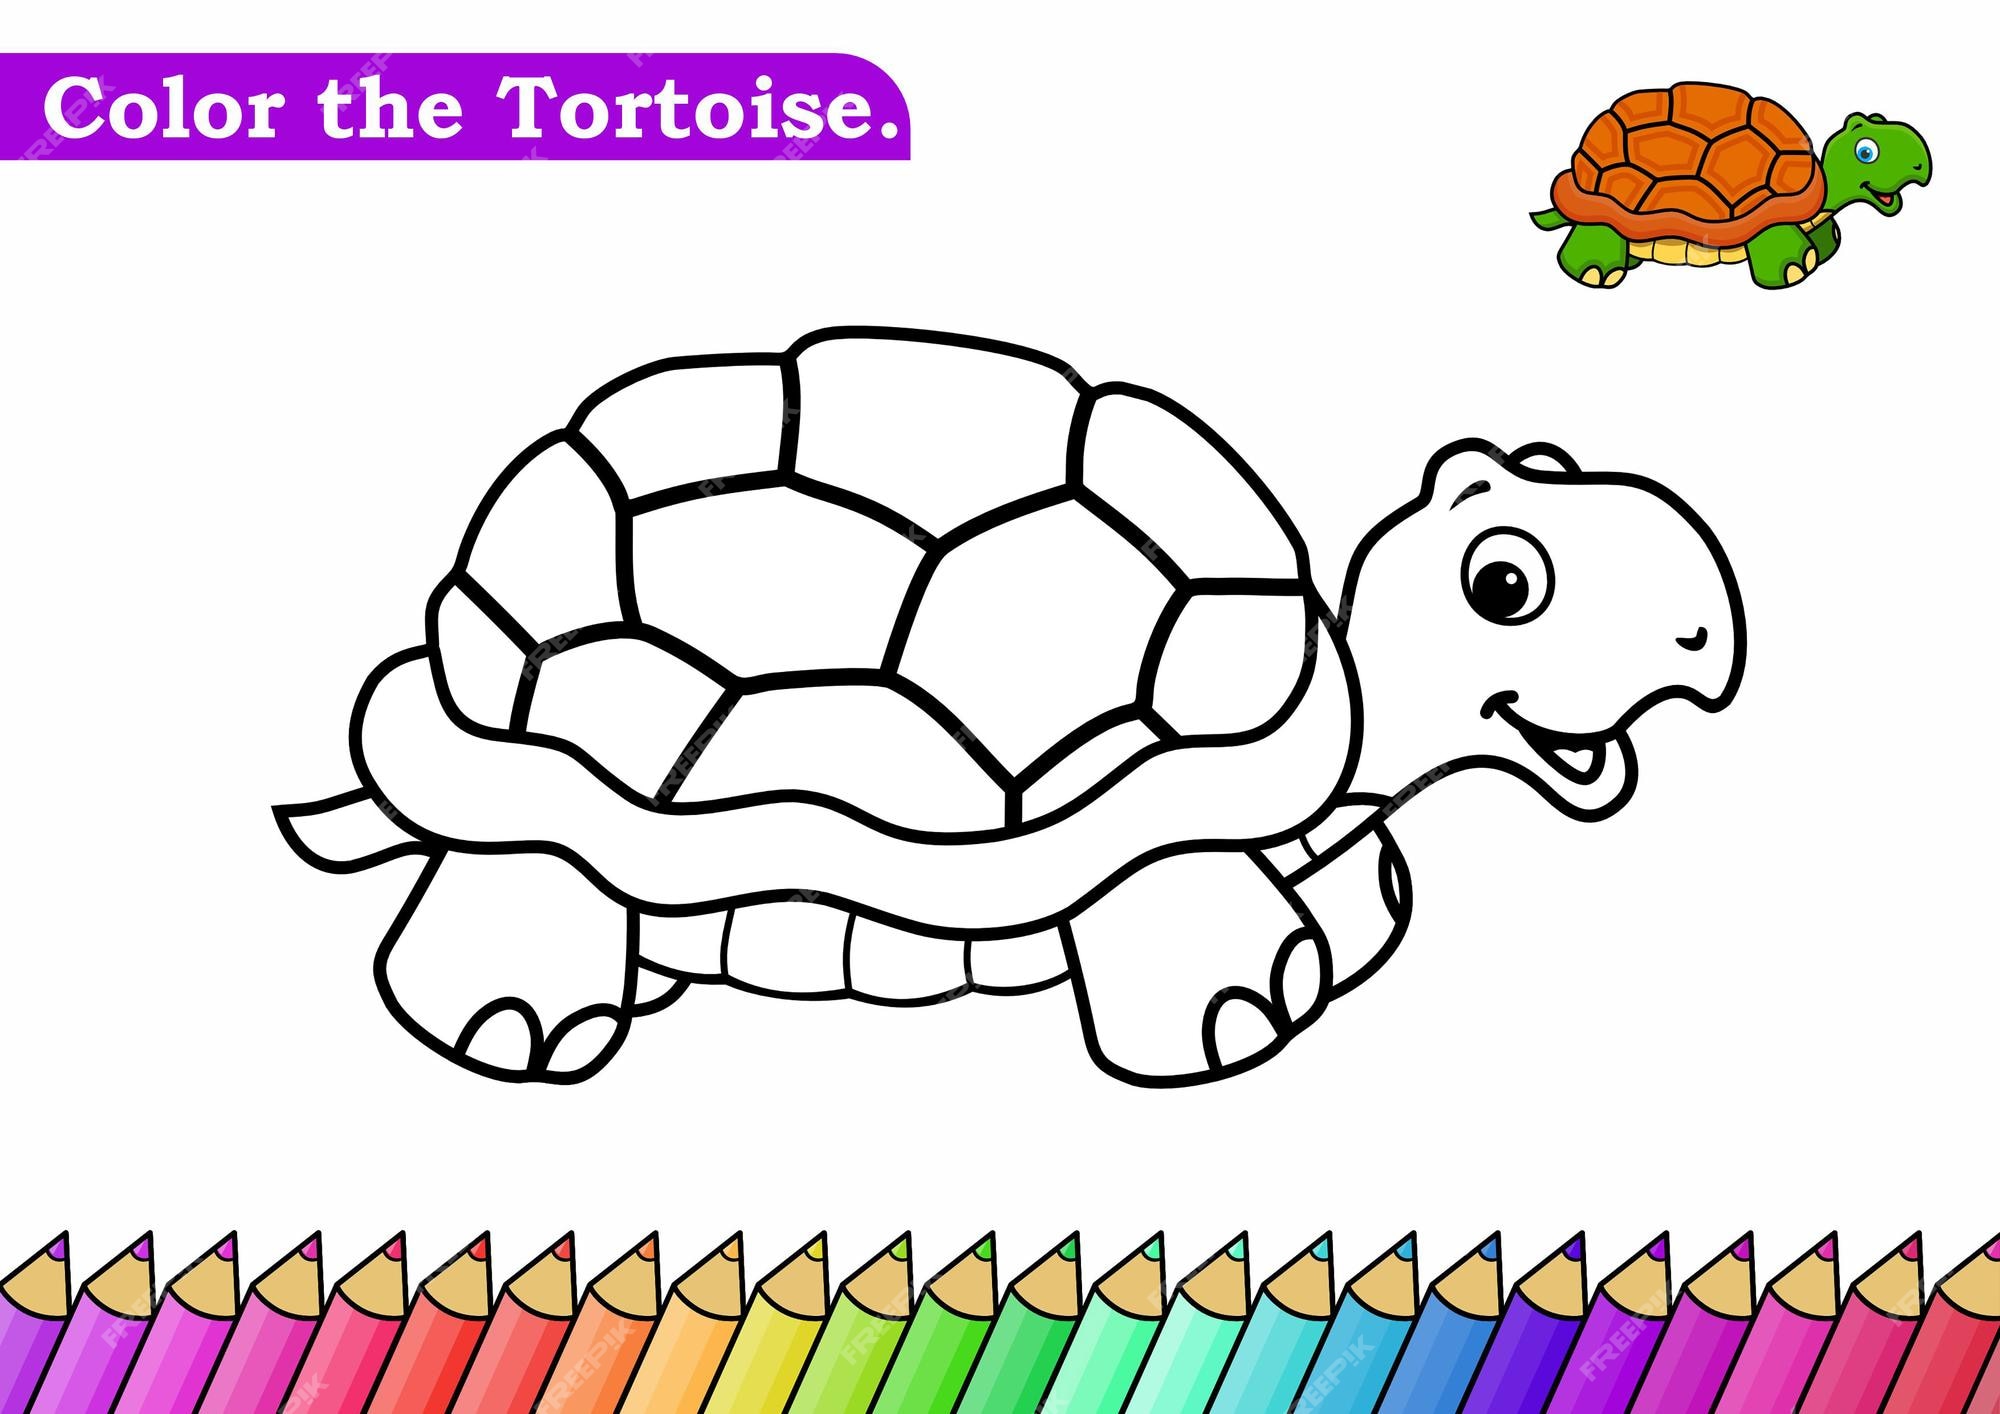 Premium Vector | Coloring page for tortoise vector illustration  kindergarten coloring pages activity worksheet